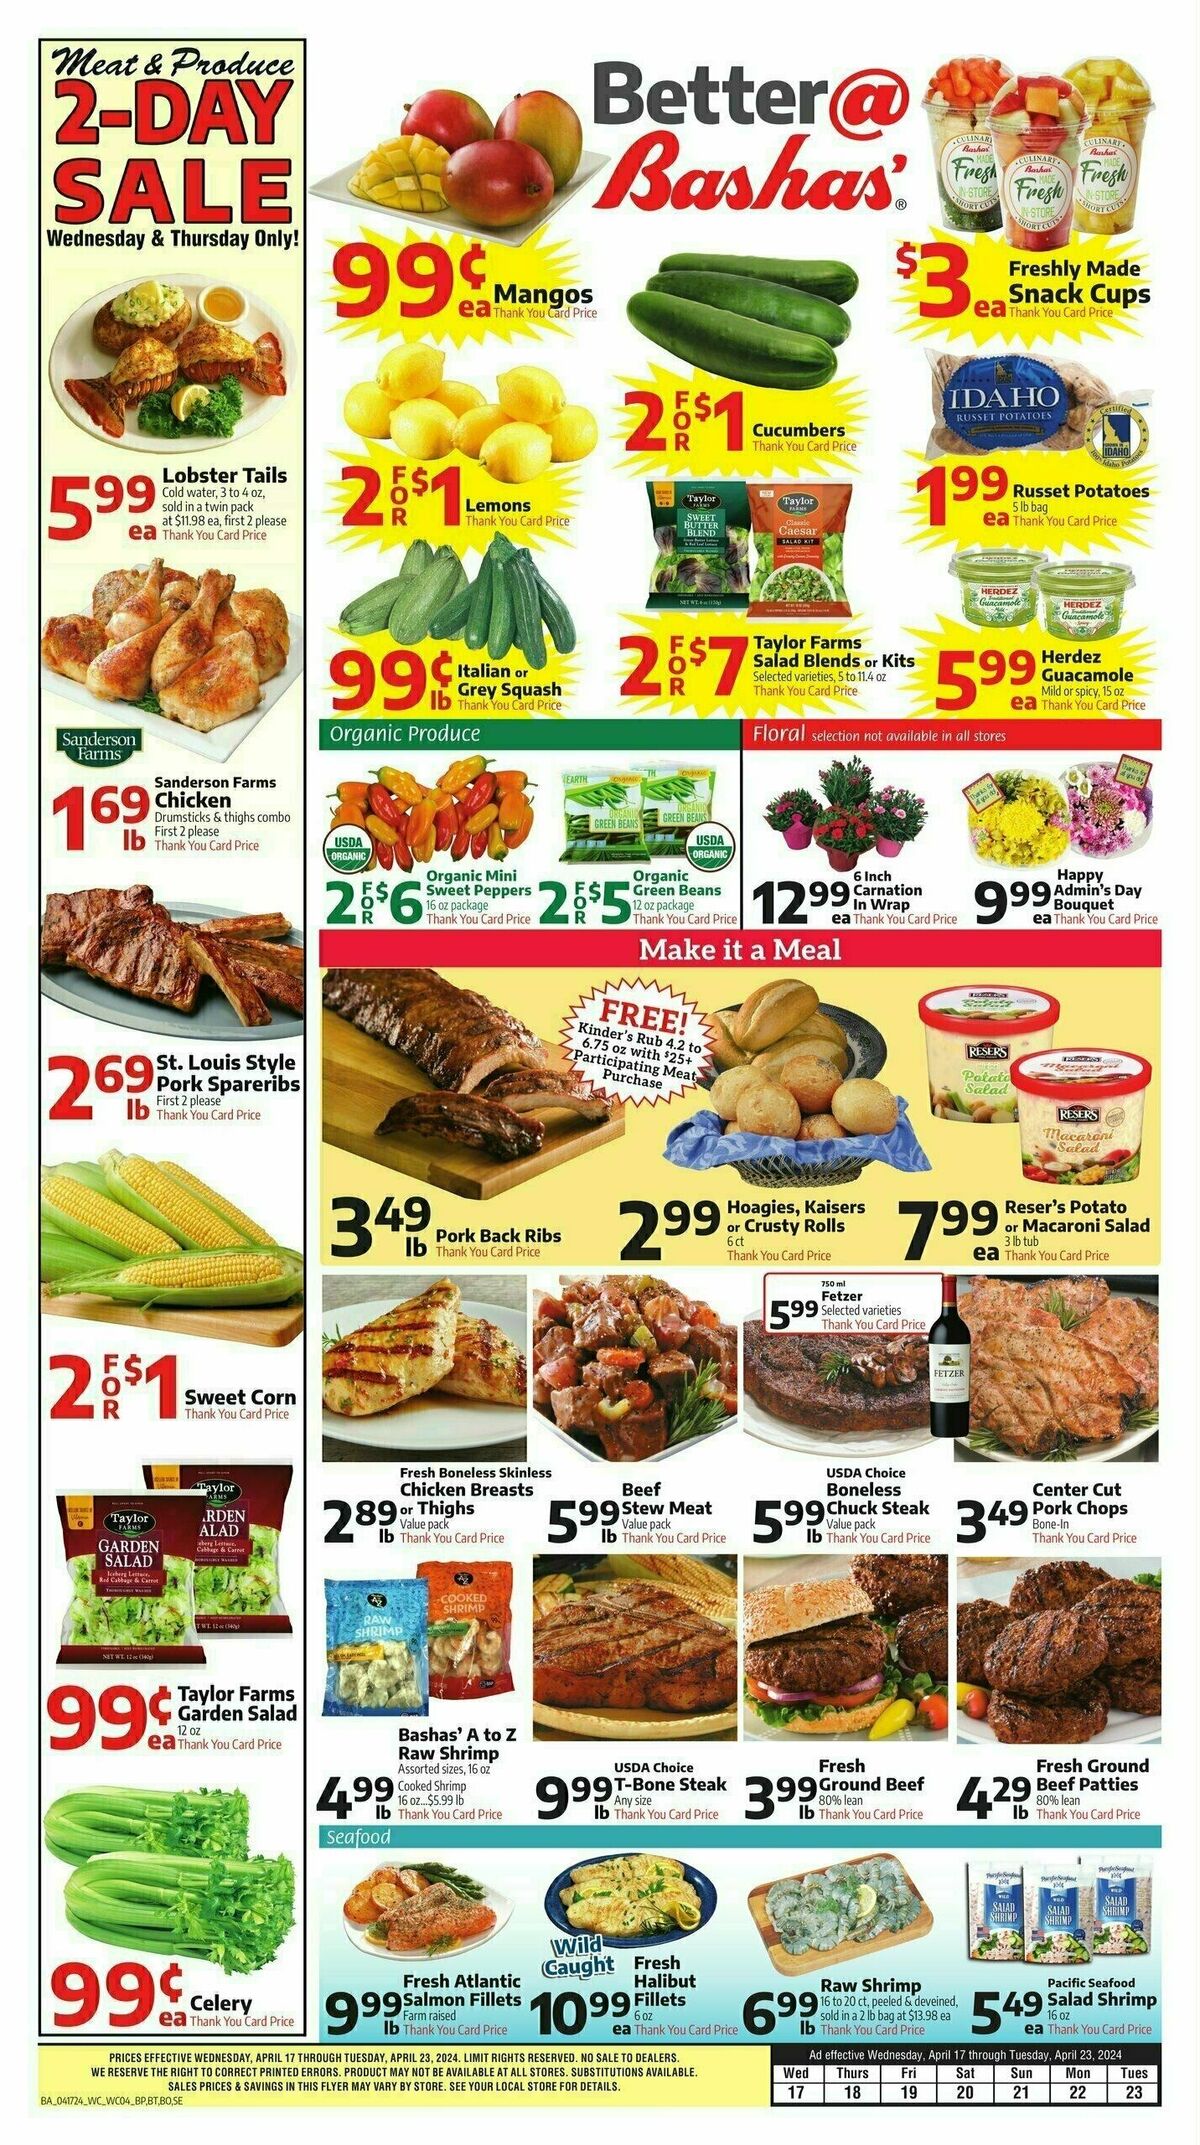 Bashas Weekly Ad from April 17